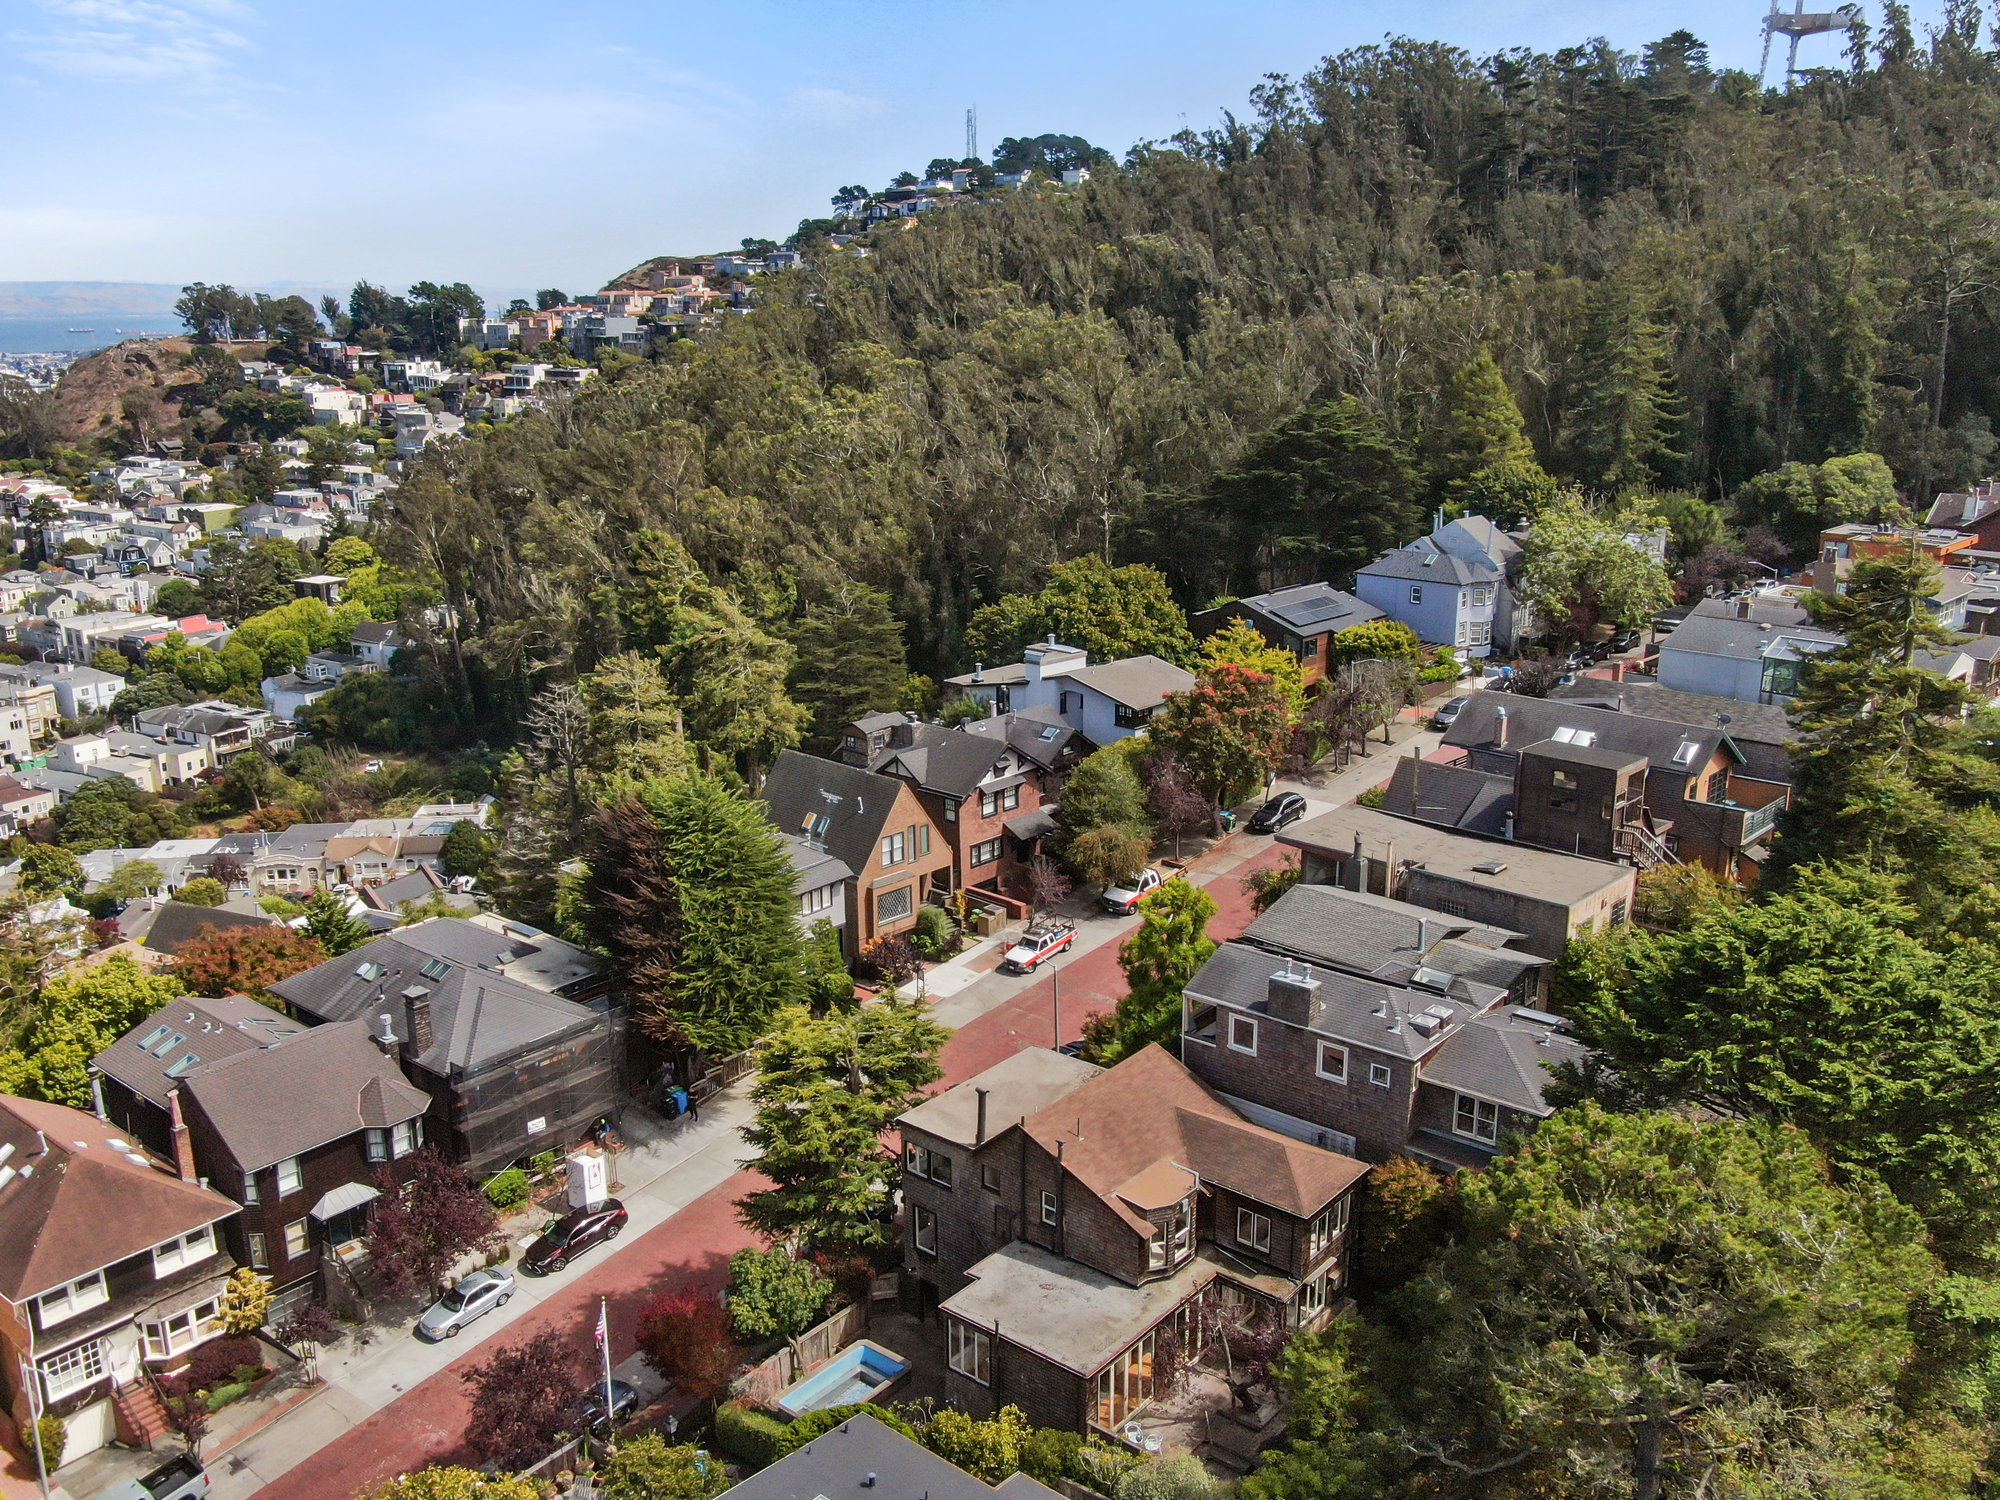 Property Photo: Aerial view of 183 Edgewood Avenue, showing Sutro tower and San Francisco Bay